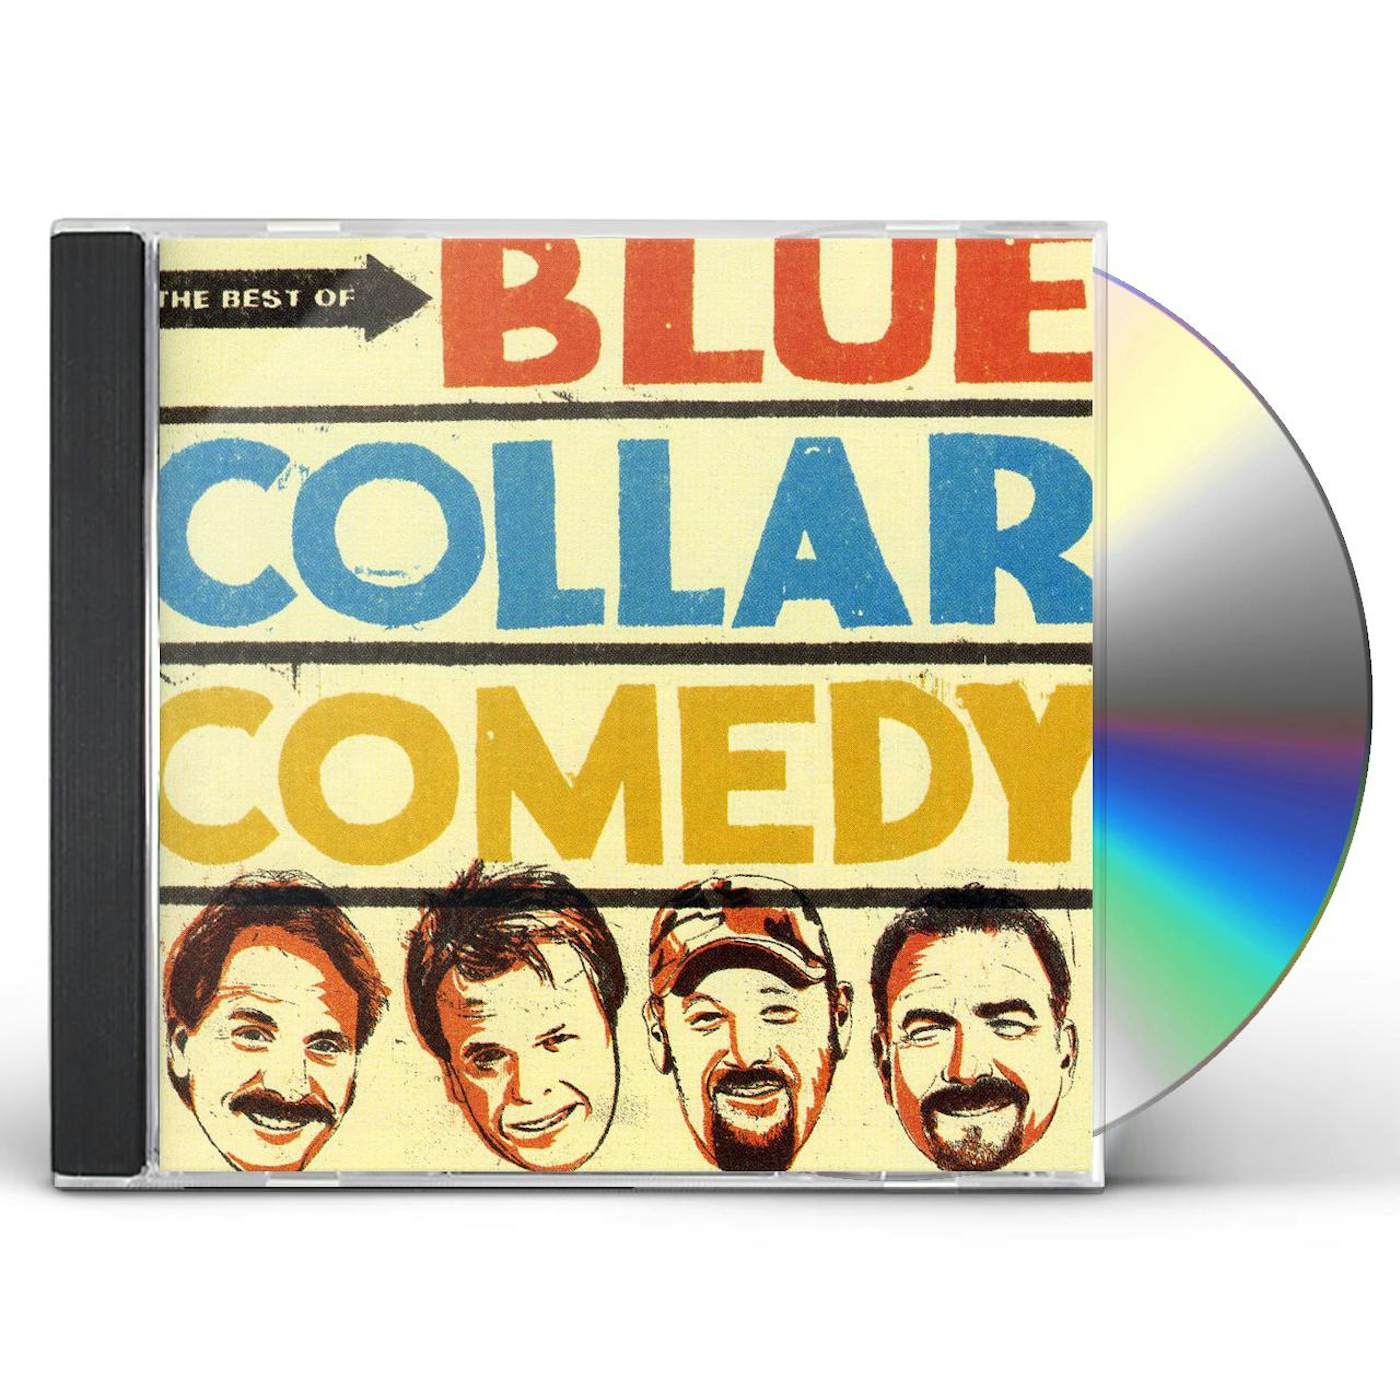 Blue Collar Comedy Tour BEST OF BLUE COLLAR COMEDY CD